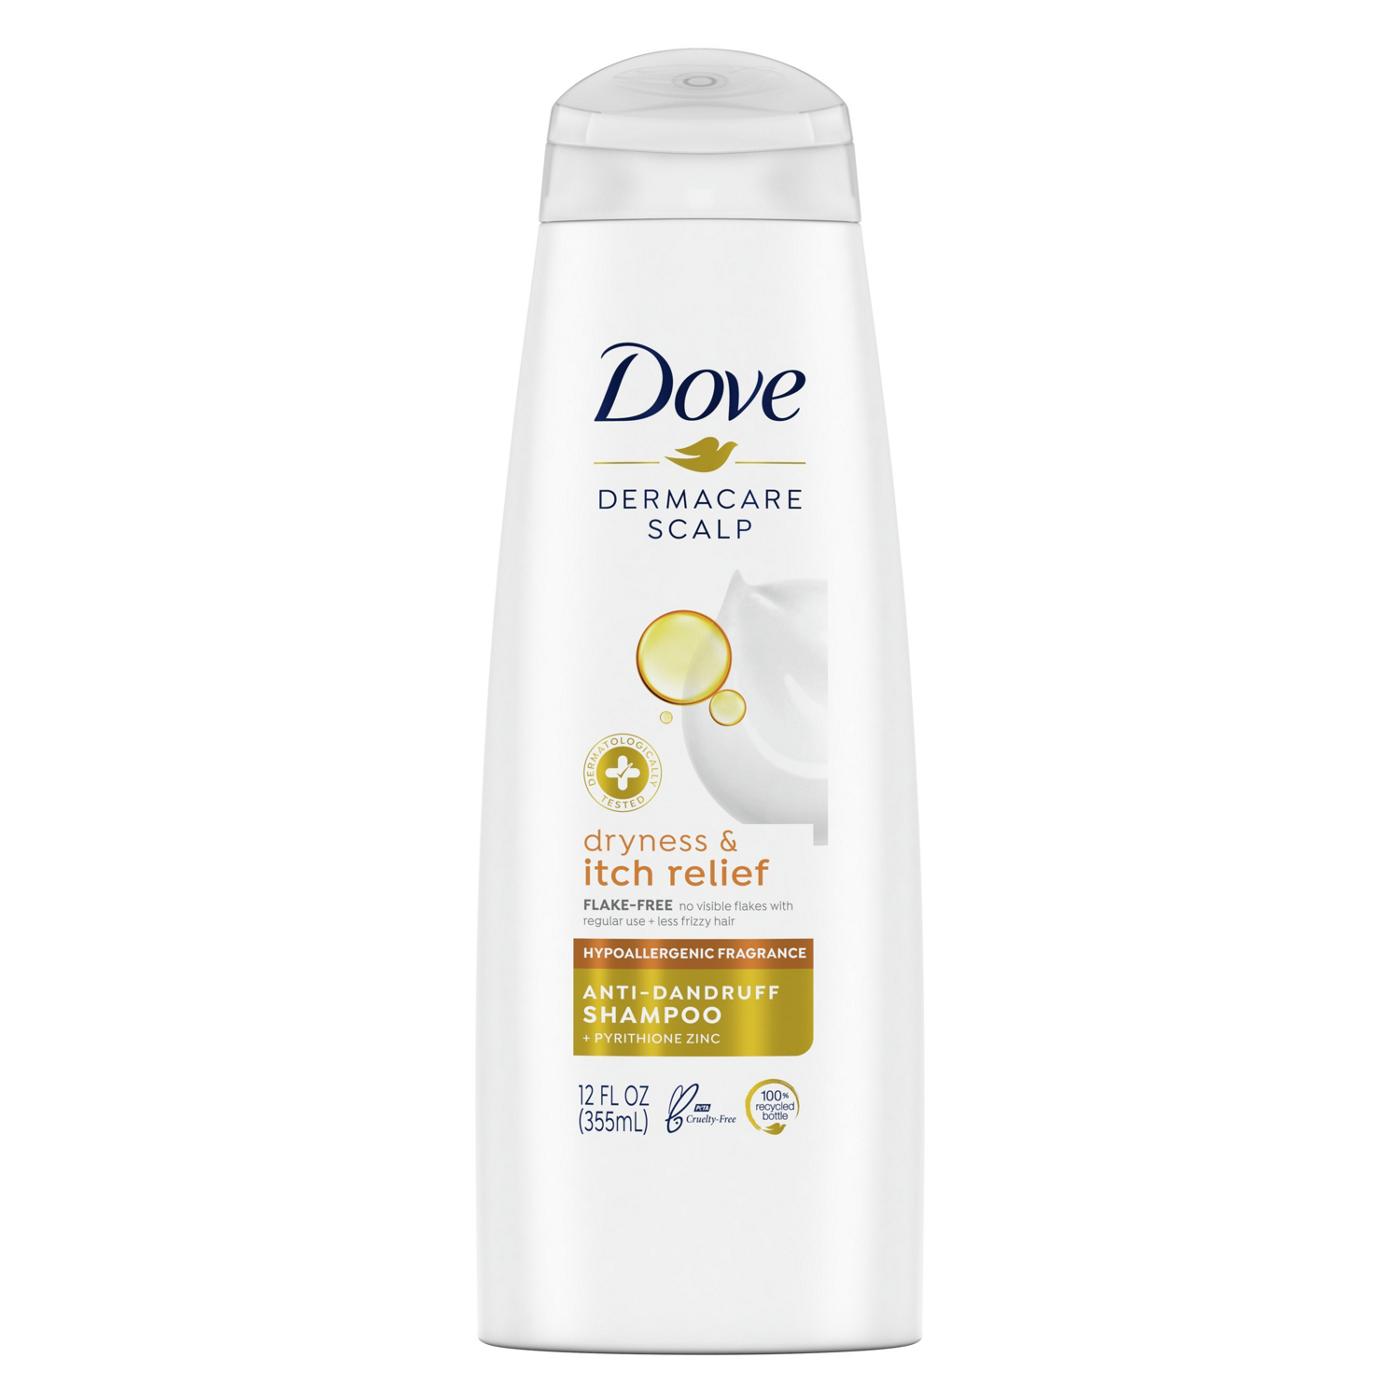 Dove DermaCare Scalp Anti Shampoo Dryness and Itch Relief - Shop Shampoo & Conditioner at H-E-B